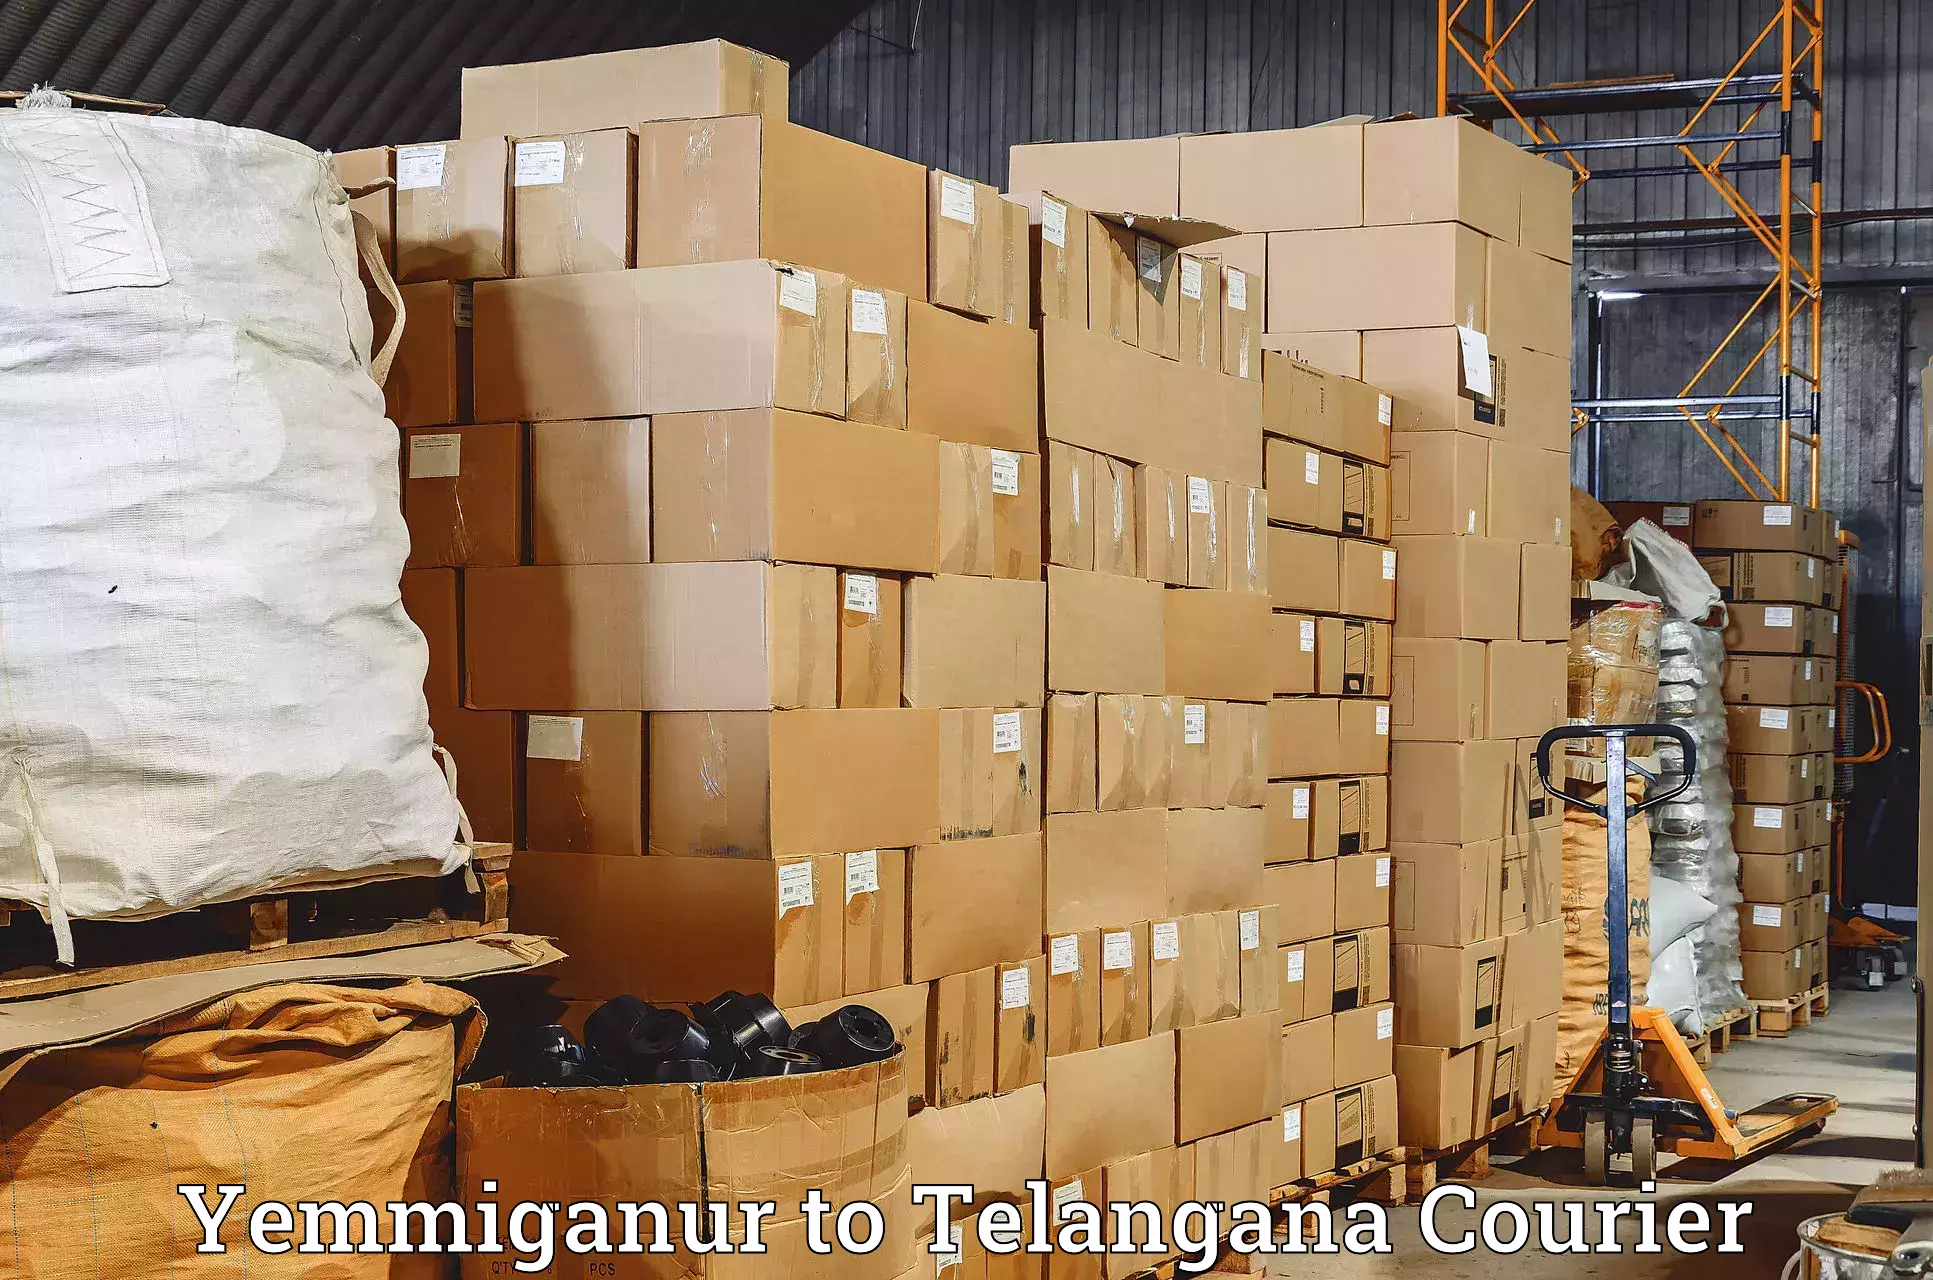 Reliable parcel services in Yemmiganur to Hyderabad